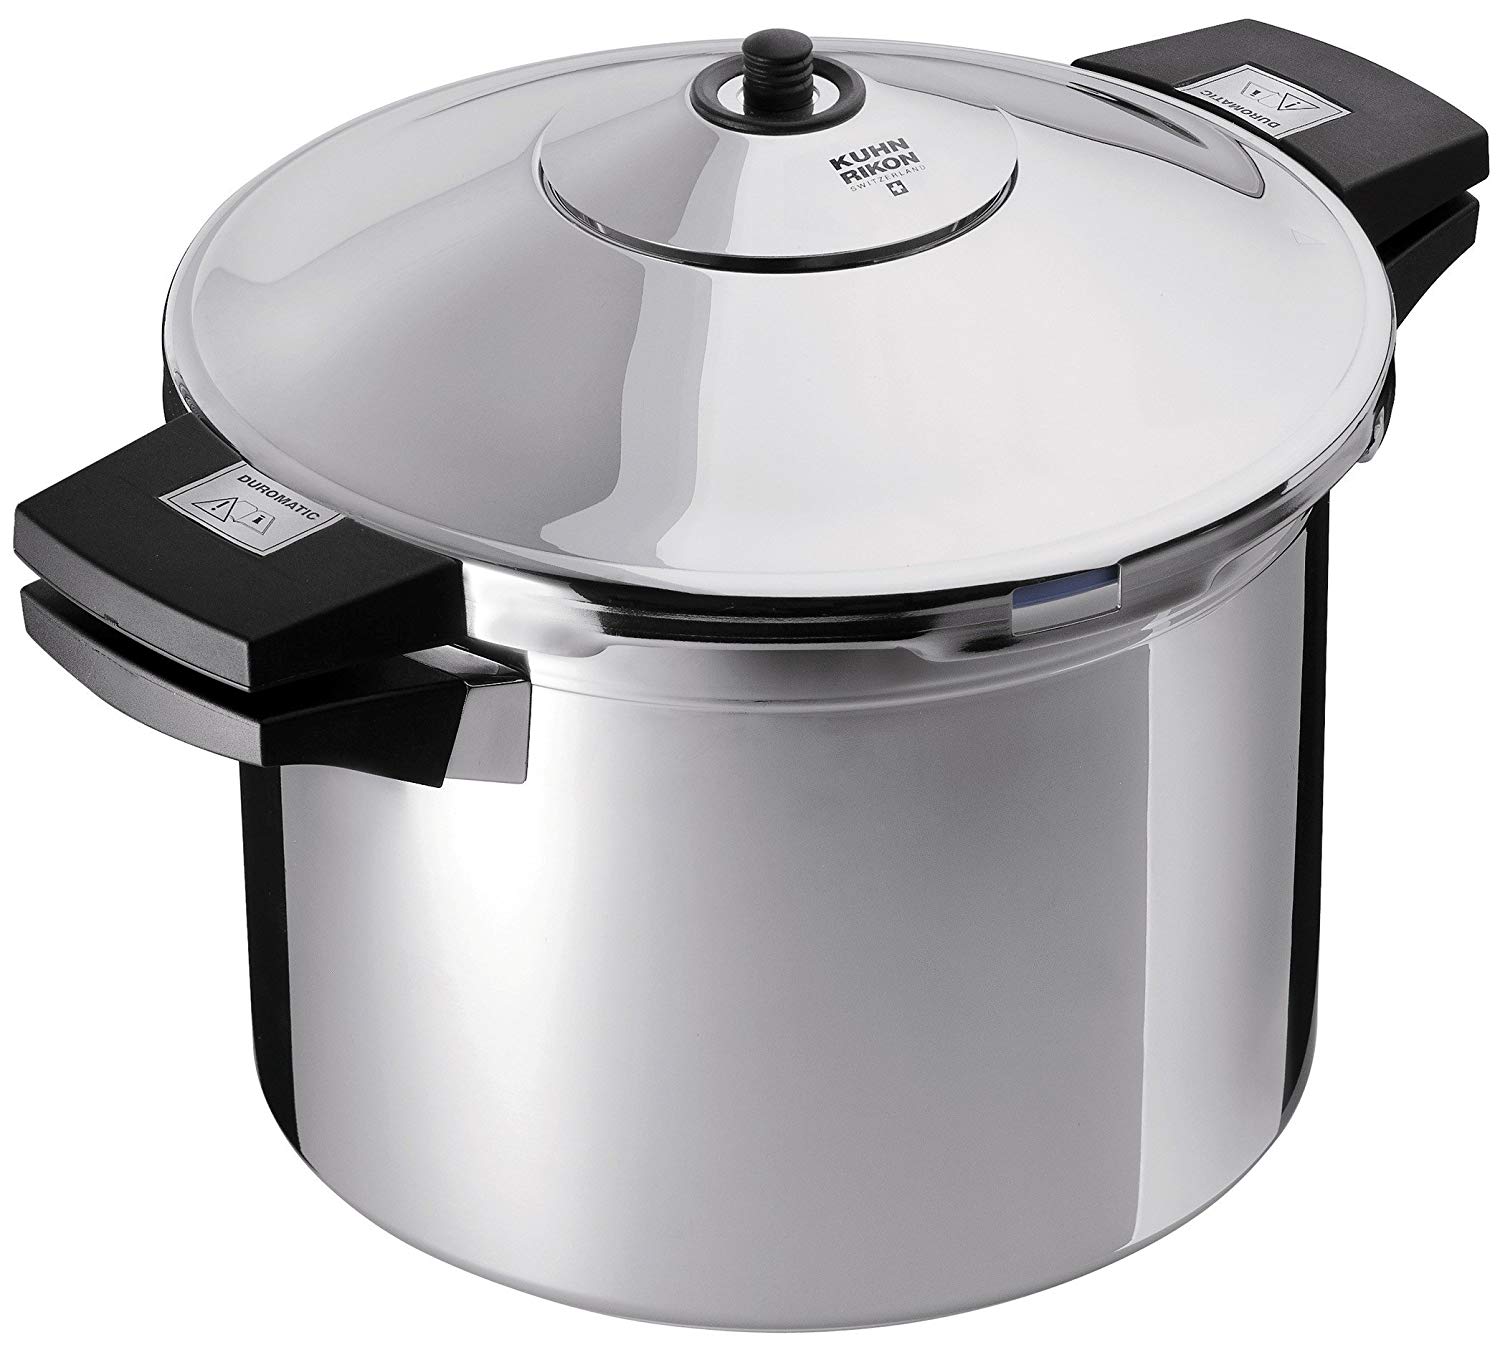 Kuhn Rikon Duromatic Inox Pressure Cooker With Side Grips (22cm), 4.0 Litre